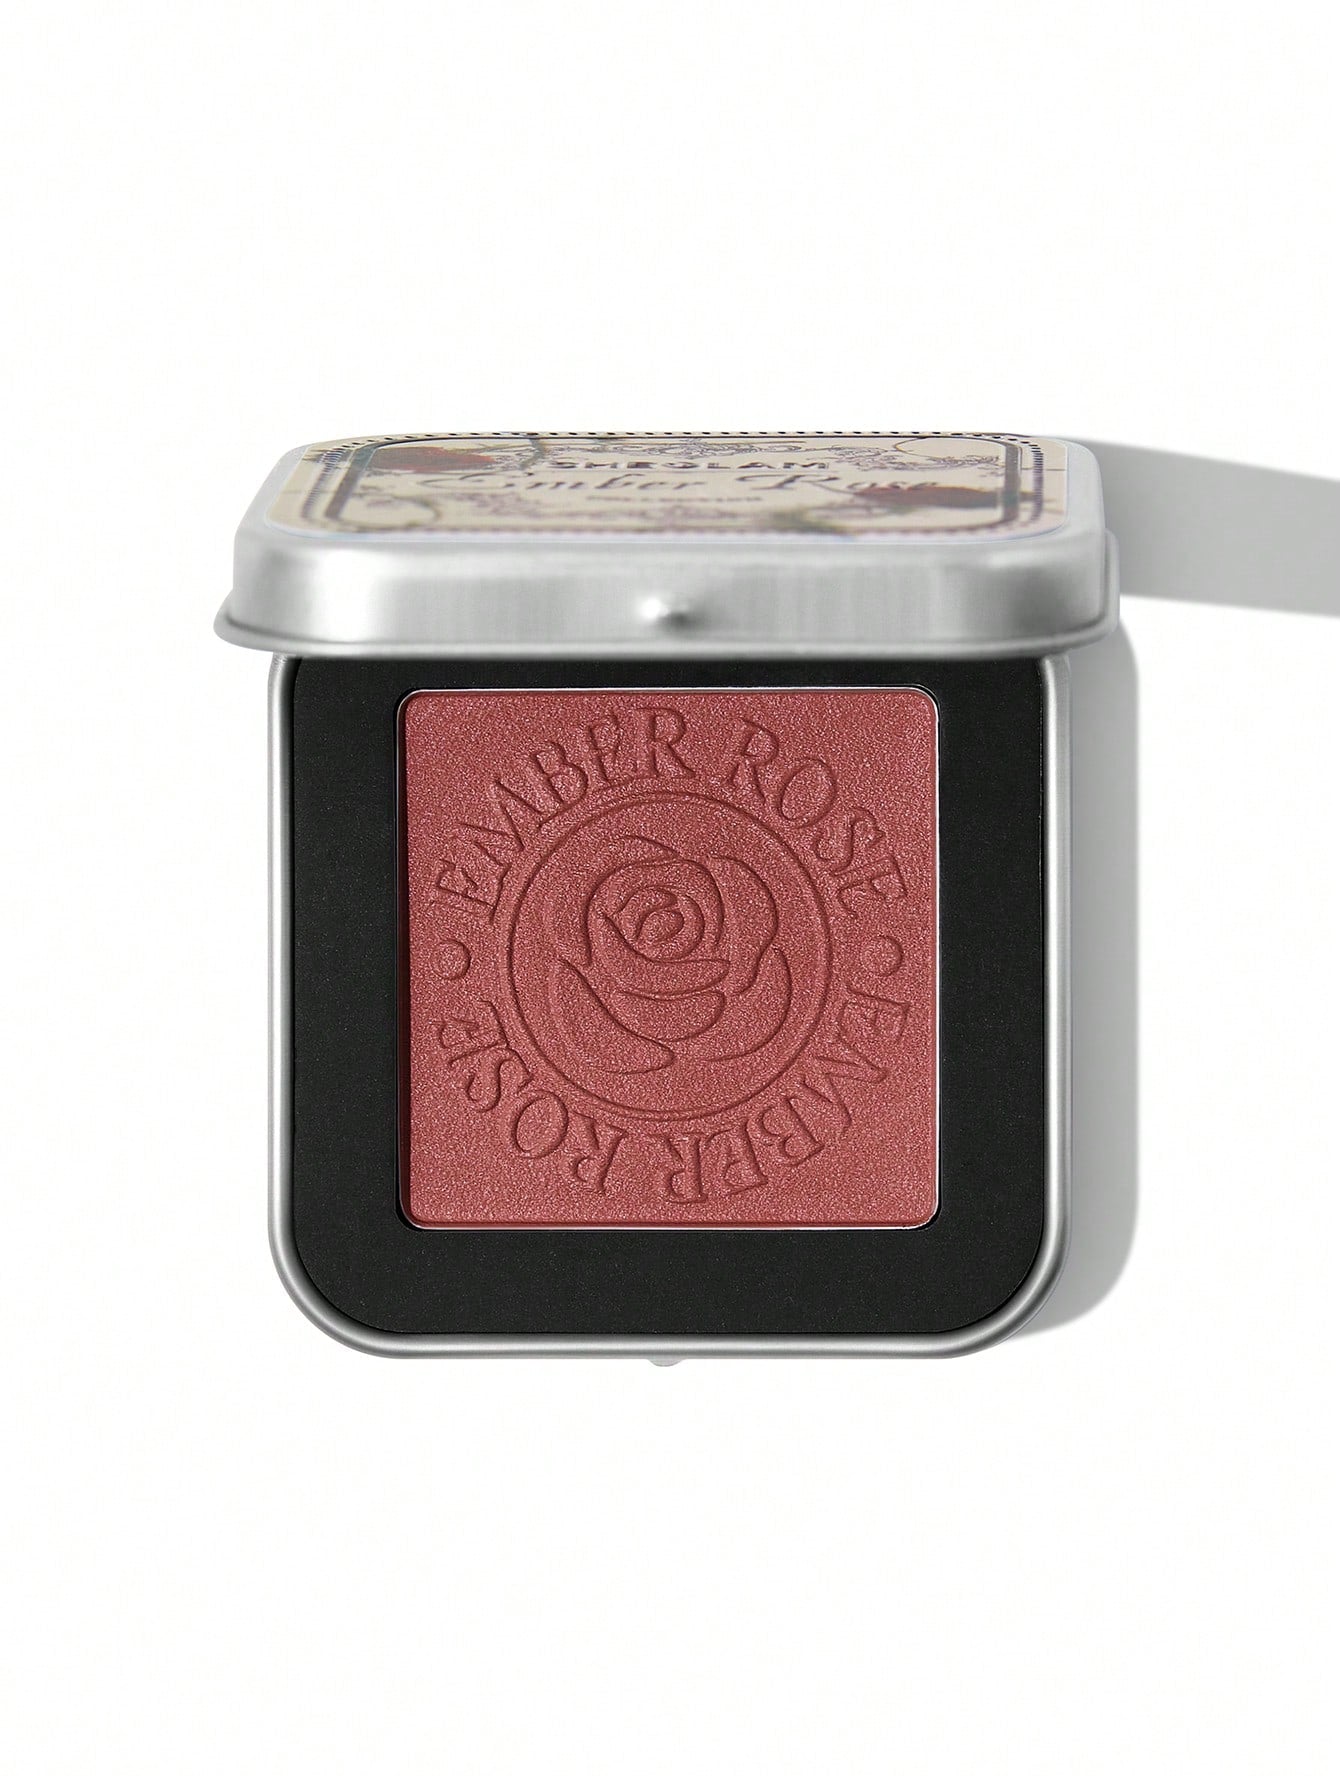 Ember Rose Eternal Flame Cream Blush-I'm Yours